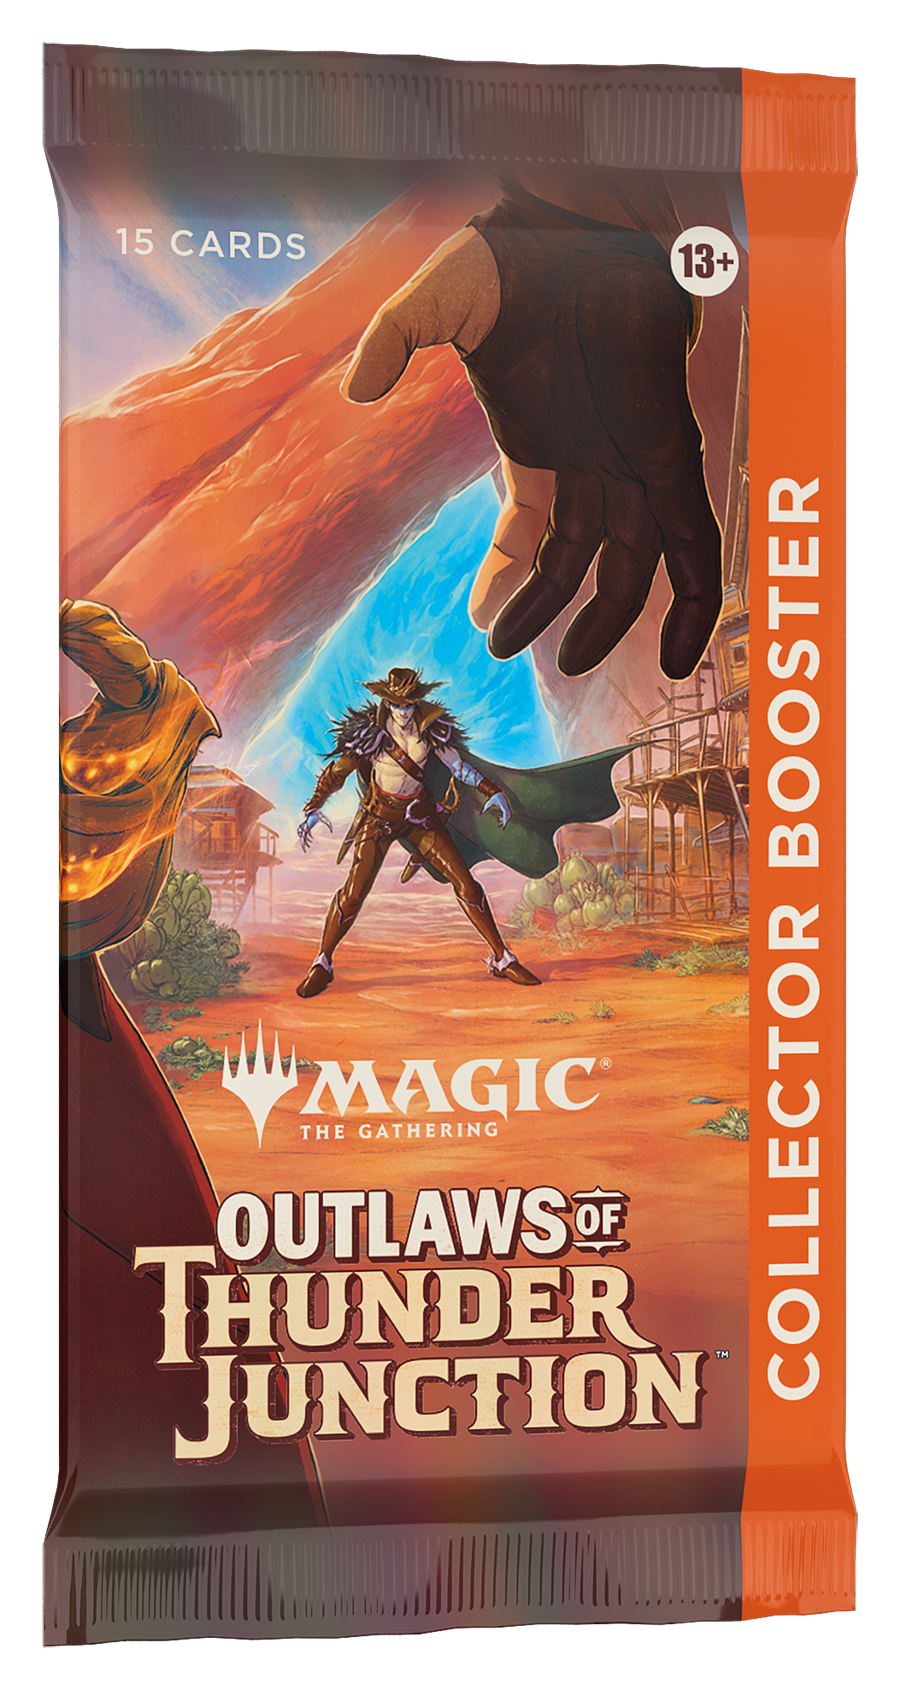 Magic The Gathering Outlaws Of Thunder Junction Collector Booster Box (Pre-Order) - Miraj Trading